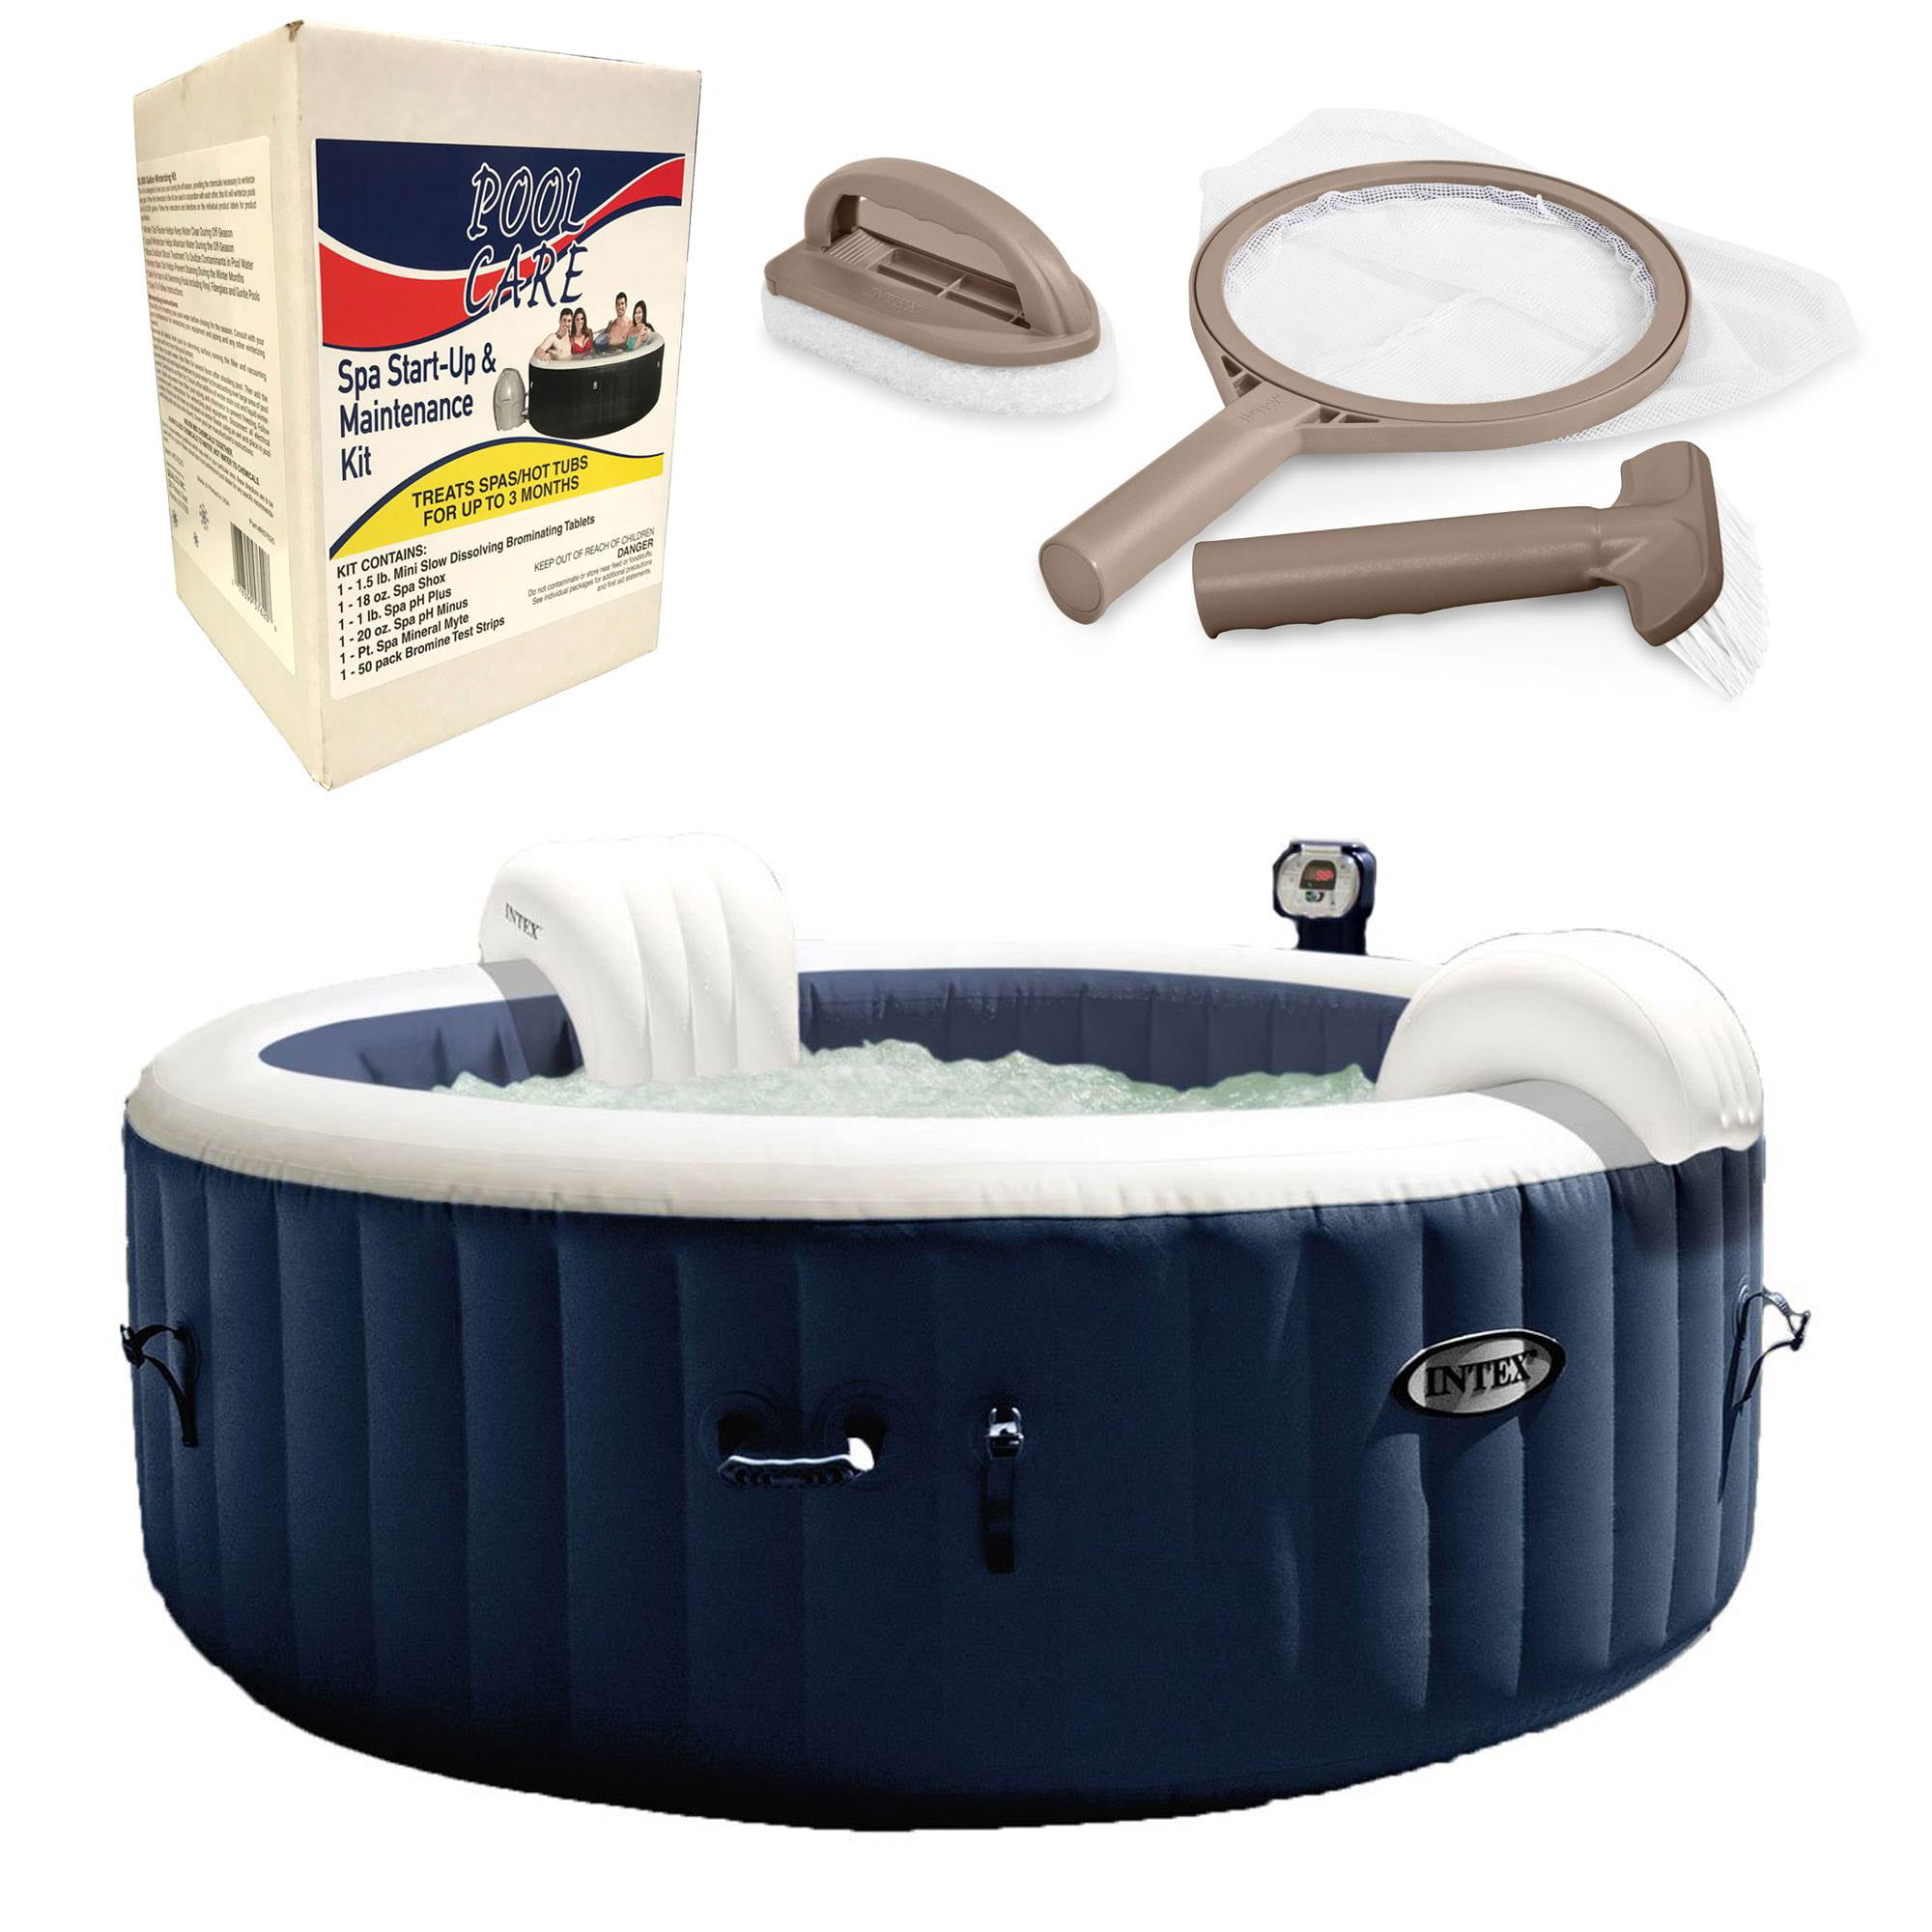 Intex Pure Spa 4 Person Home Inflatable Hot Tub Accessory Kit